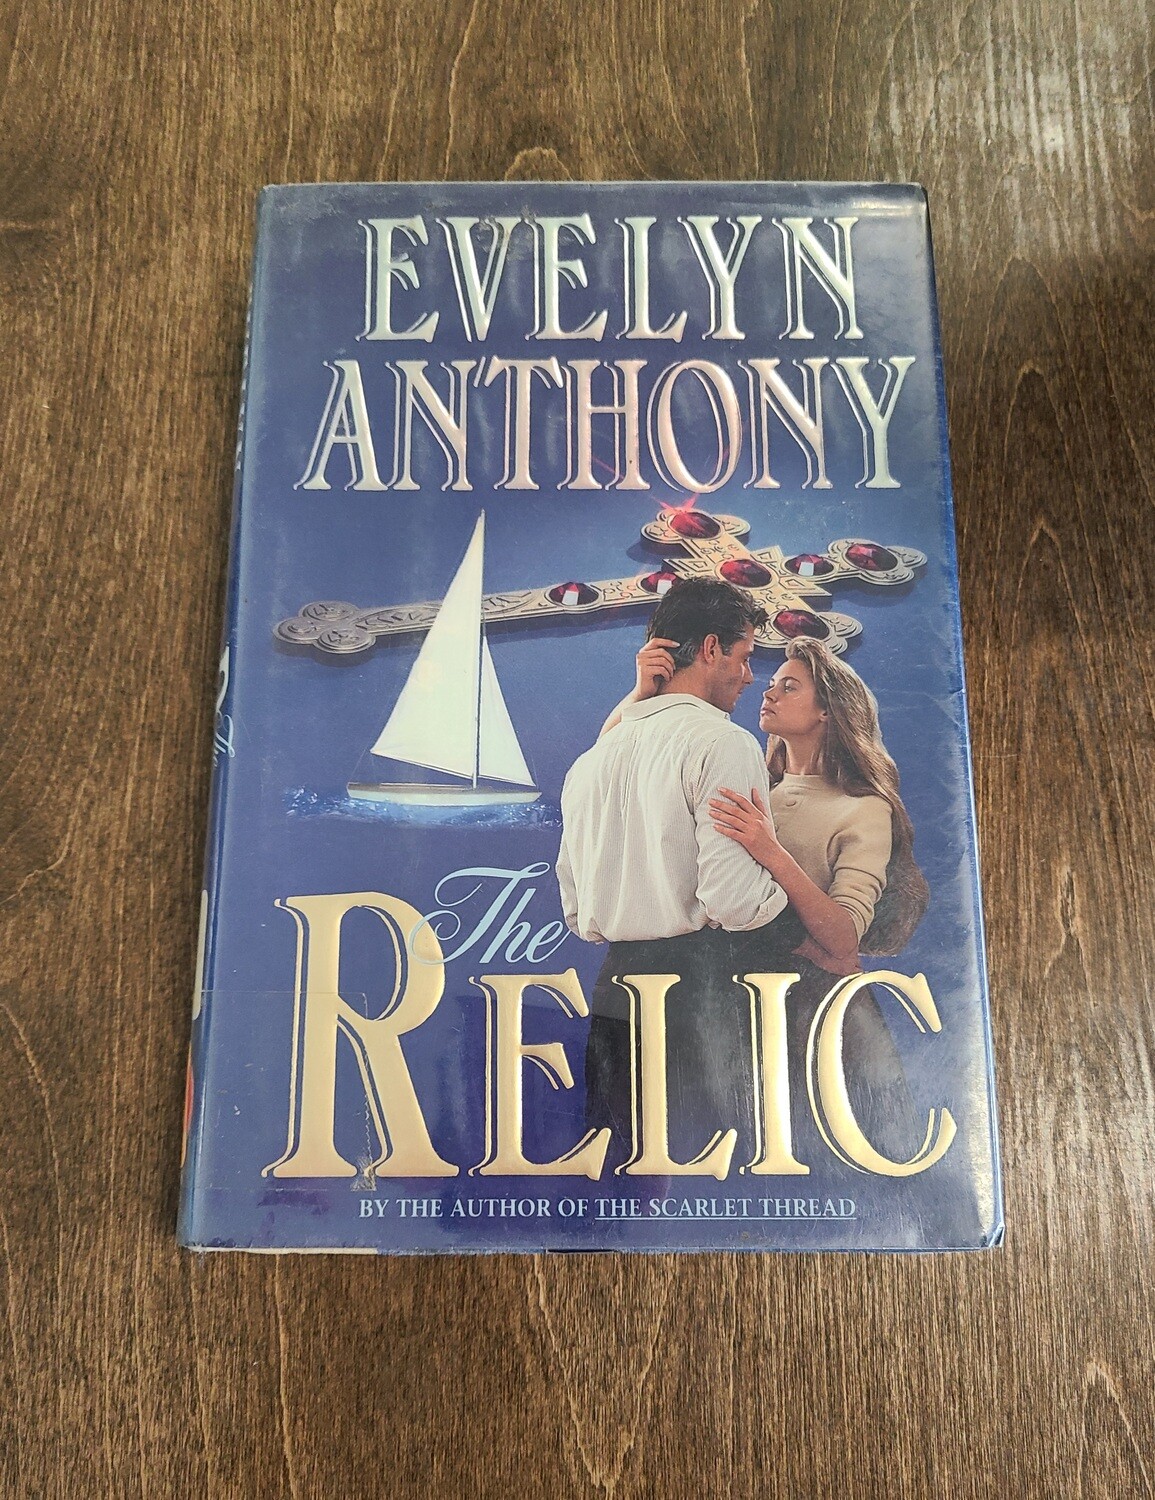 The Relic by Evelyn Anthony